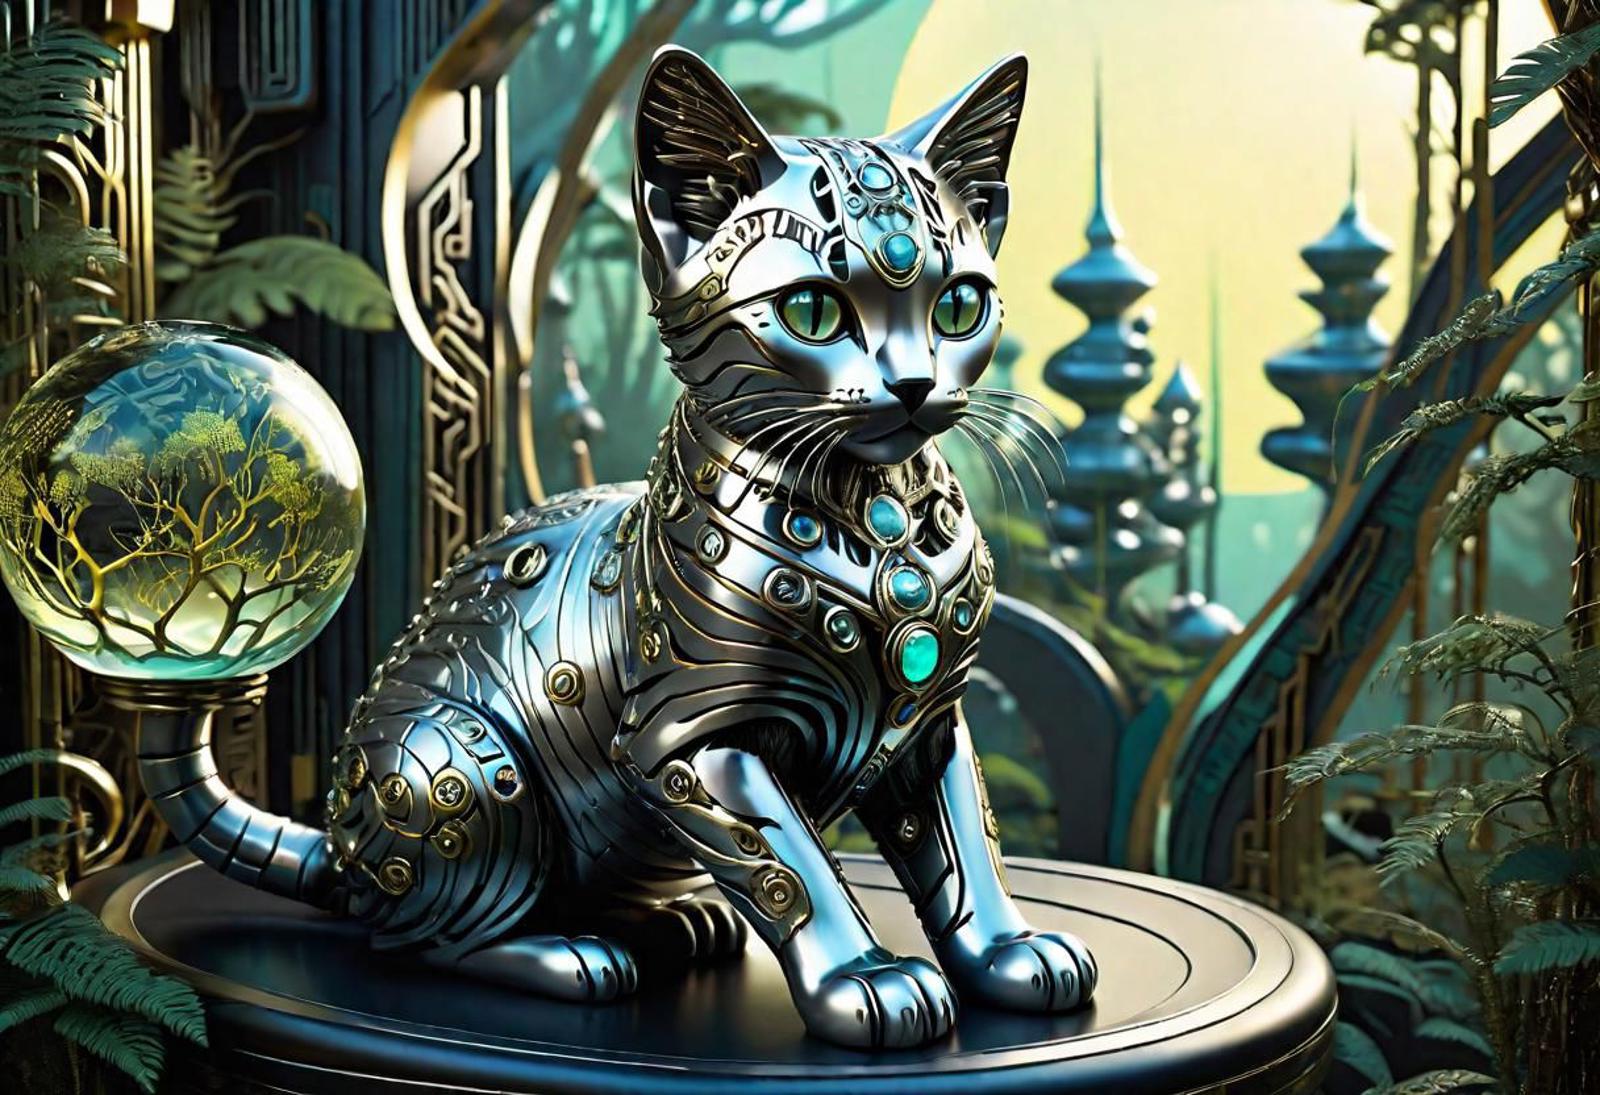 A cat with glowing green eyes sitting on a round pedestal, surrounded by a futuristic and fantasy-like environment.